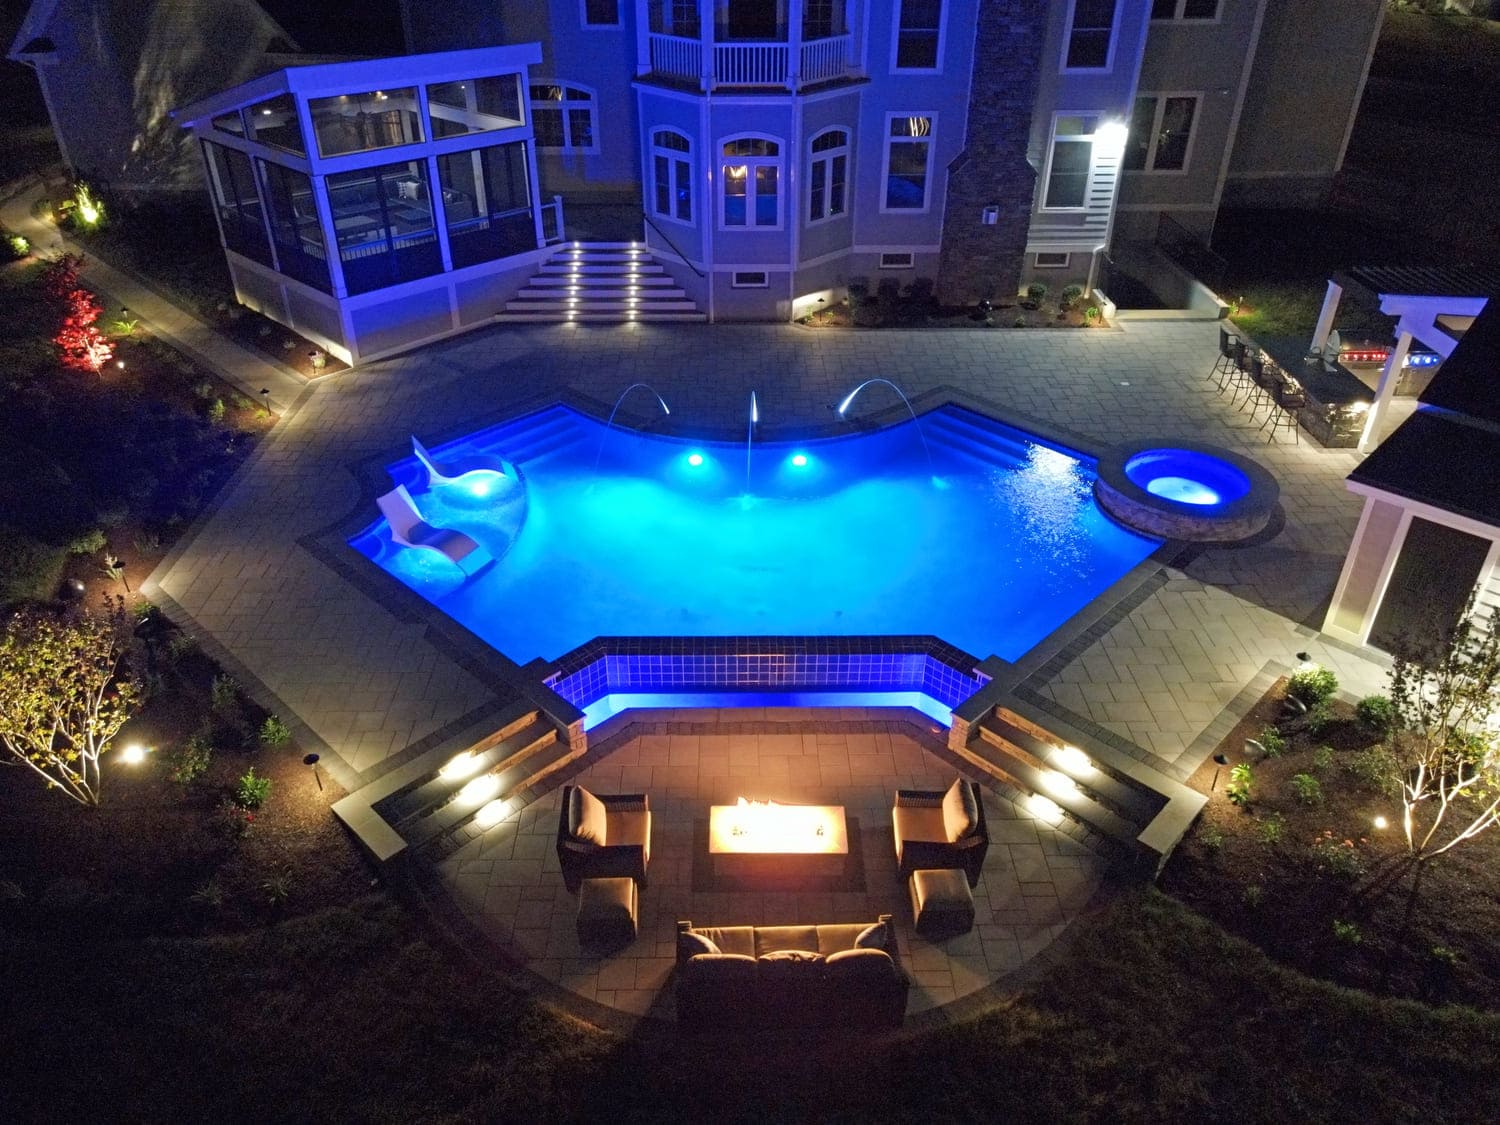 aerial-view-of-pool-patio-porch-and-deck-at-night